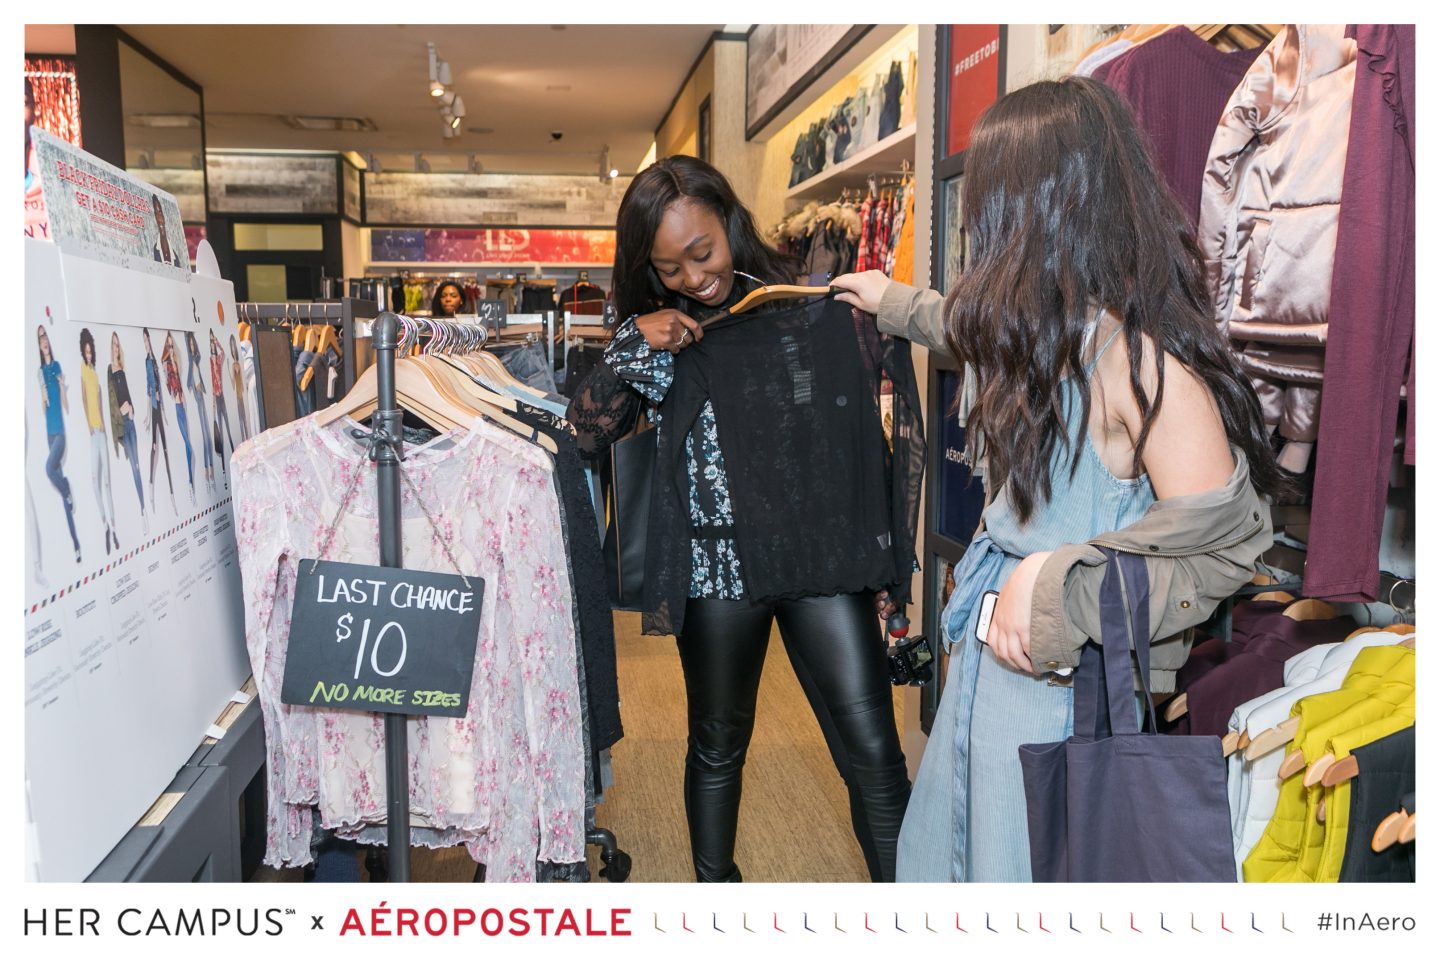 Jordan Taylor C - Prepping for Winter at the Her Campus x Aeropostale Event 